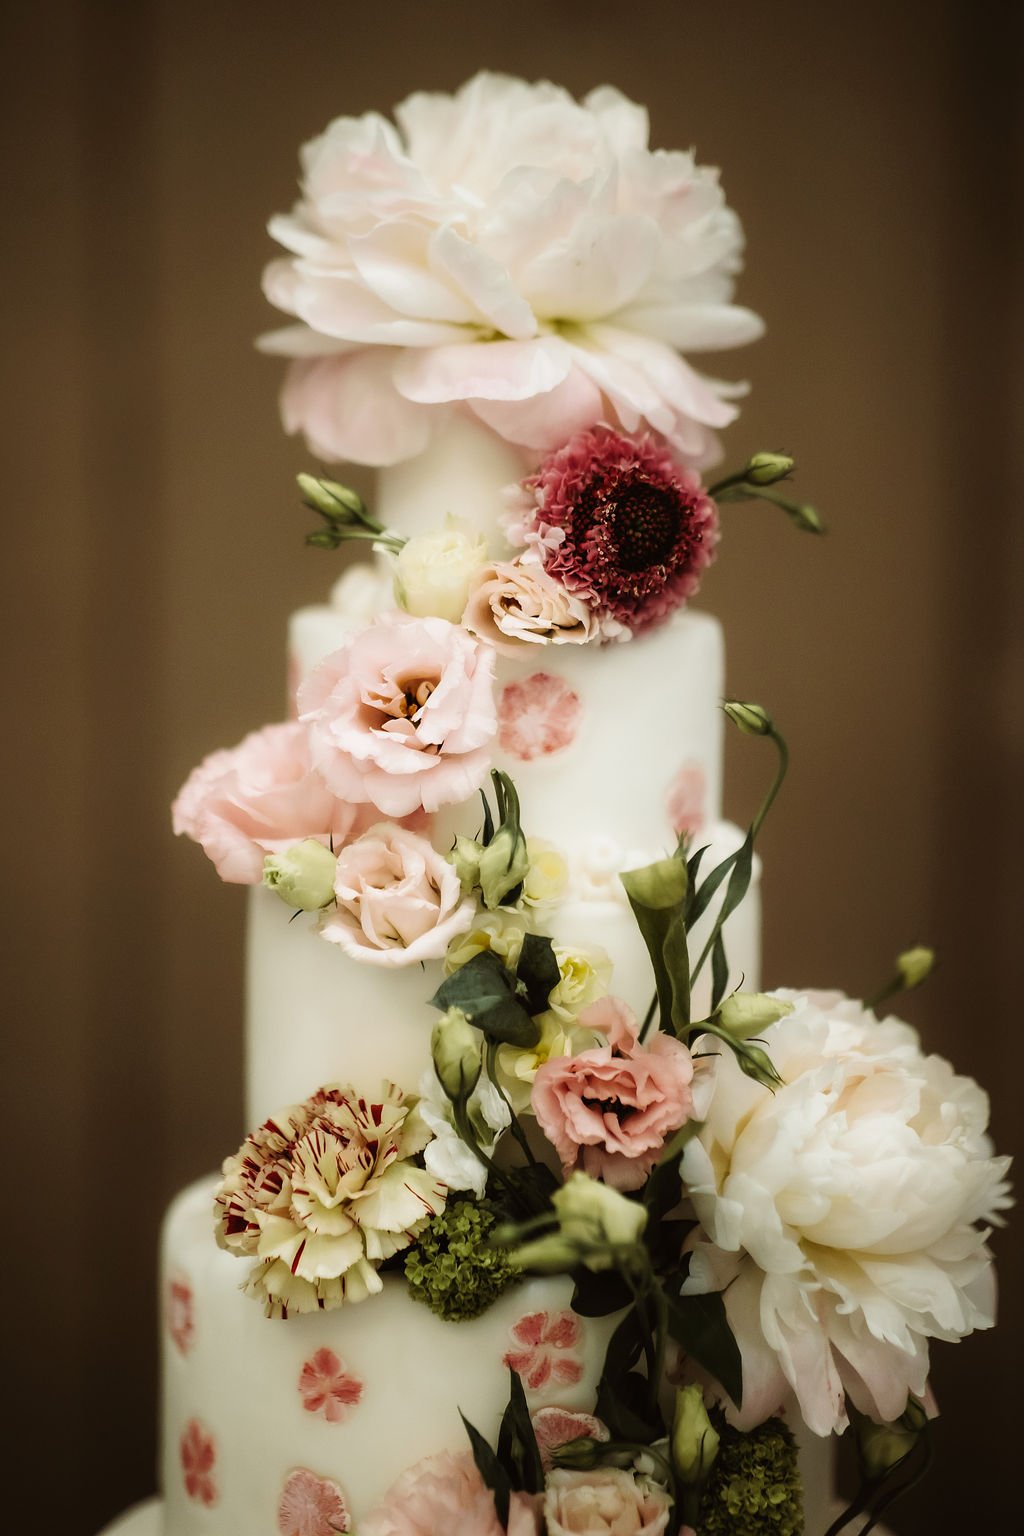 a fresh floral wedding cake in this romantic styled shoot at the four seasons hotel